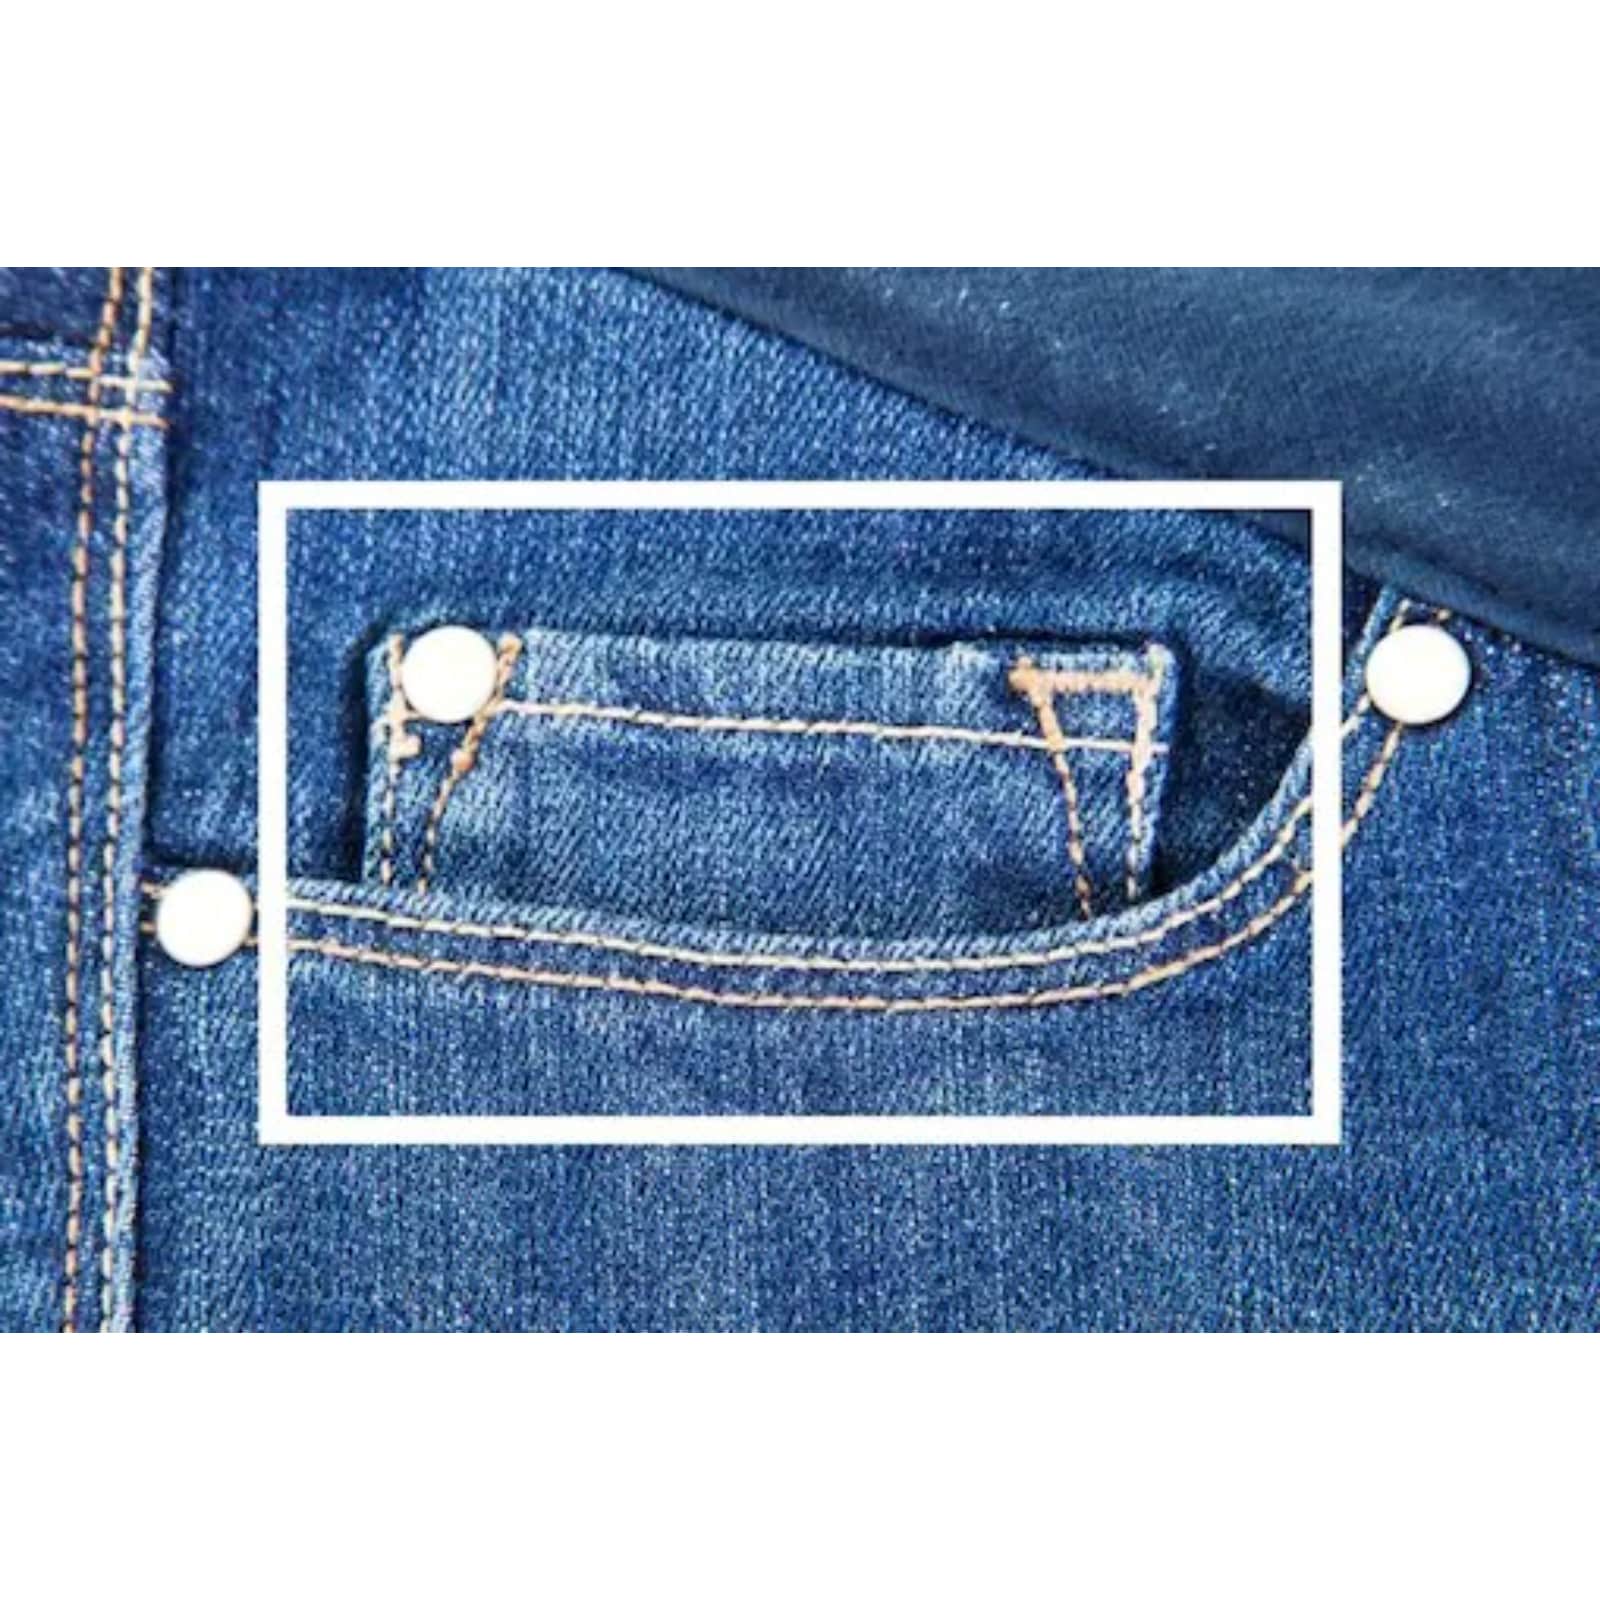 Why Is There a Tiny Pocket Above the Front Pocket on Jeans?